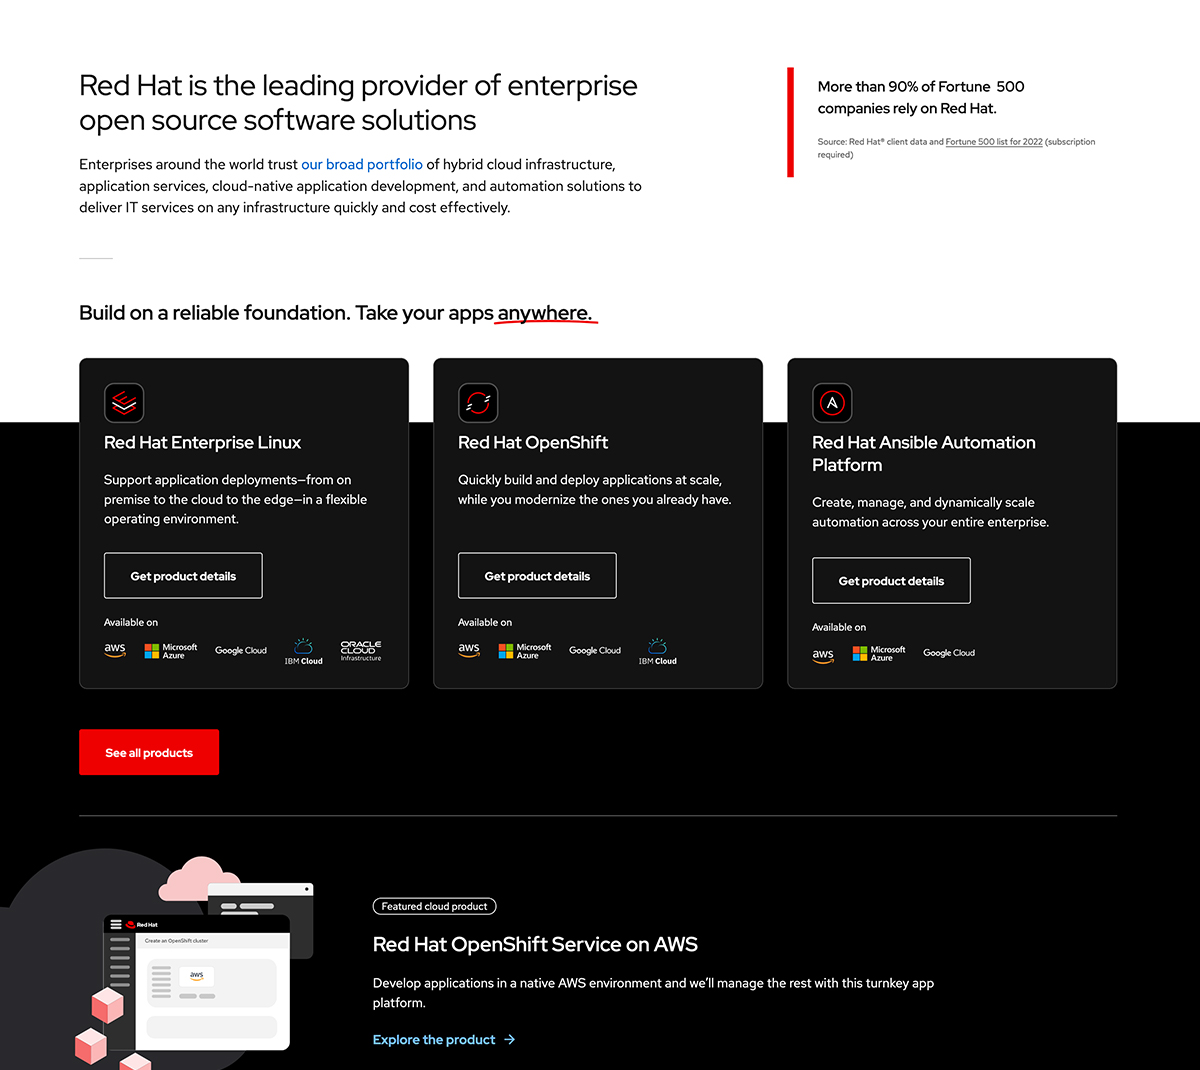 screenshot of a portion of the Red Hat homepage that shows 3 cards about their platform products.